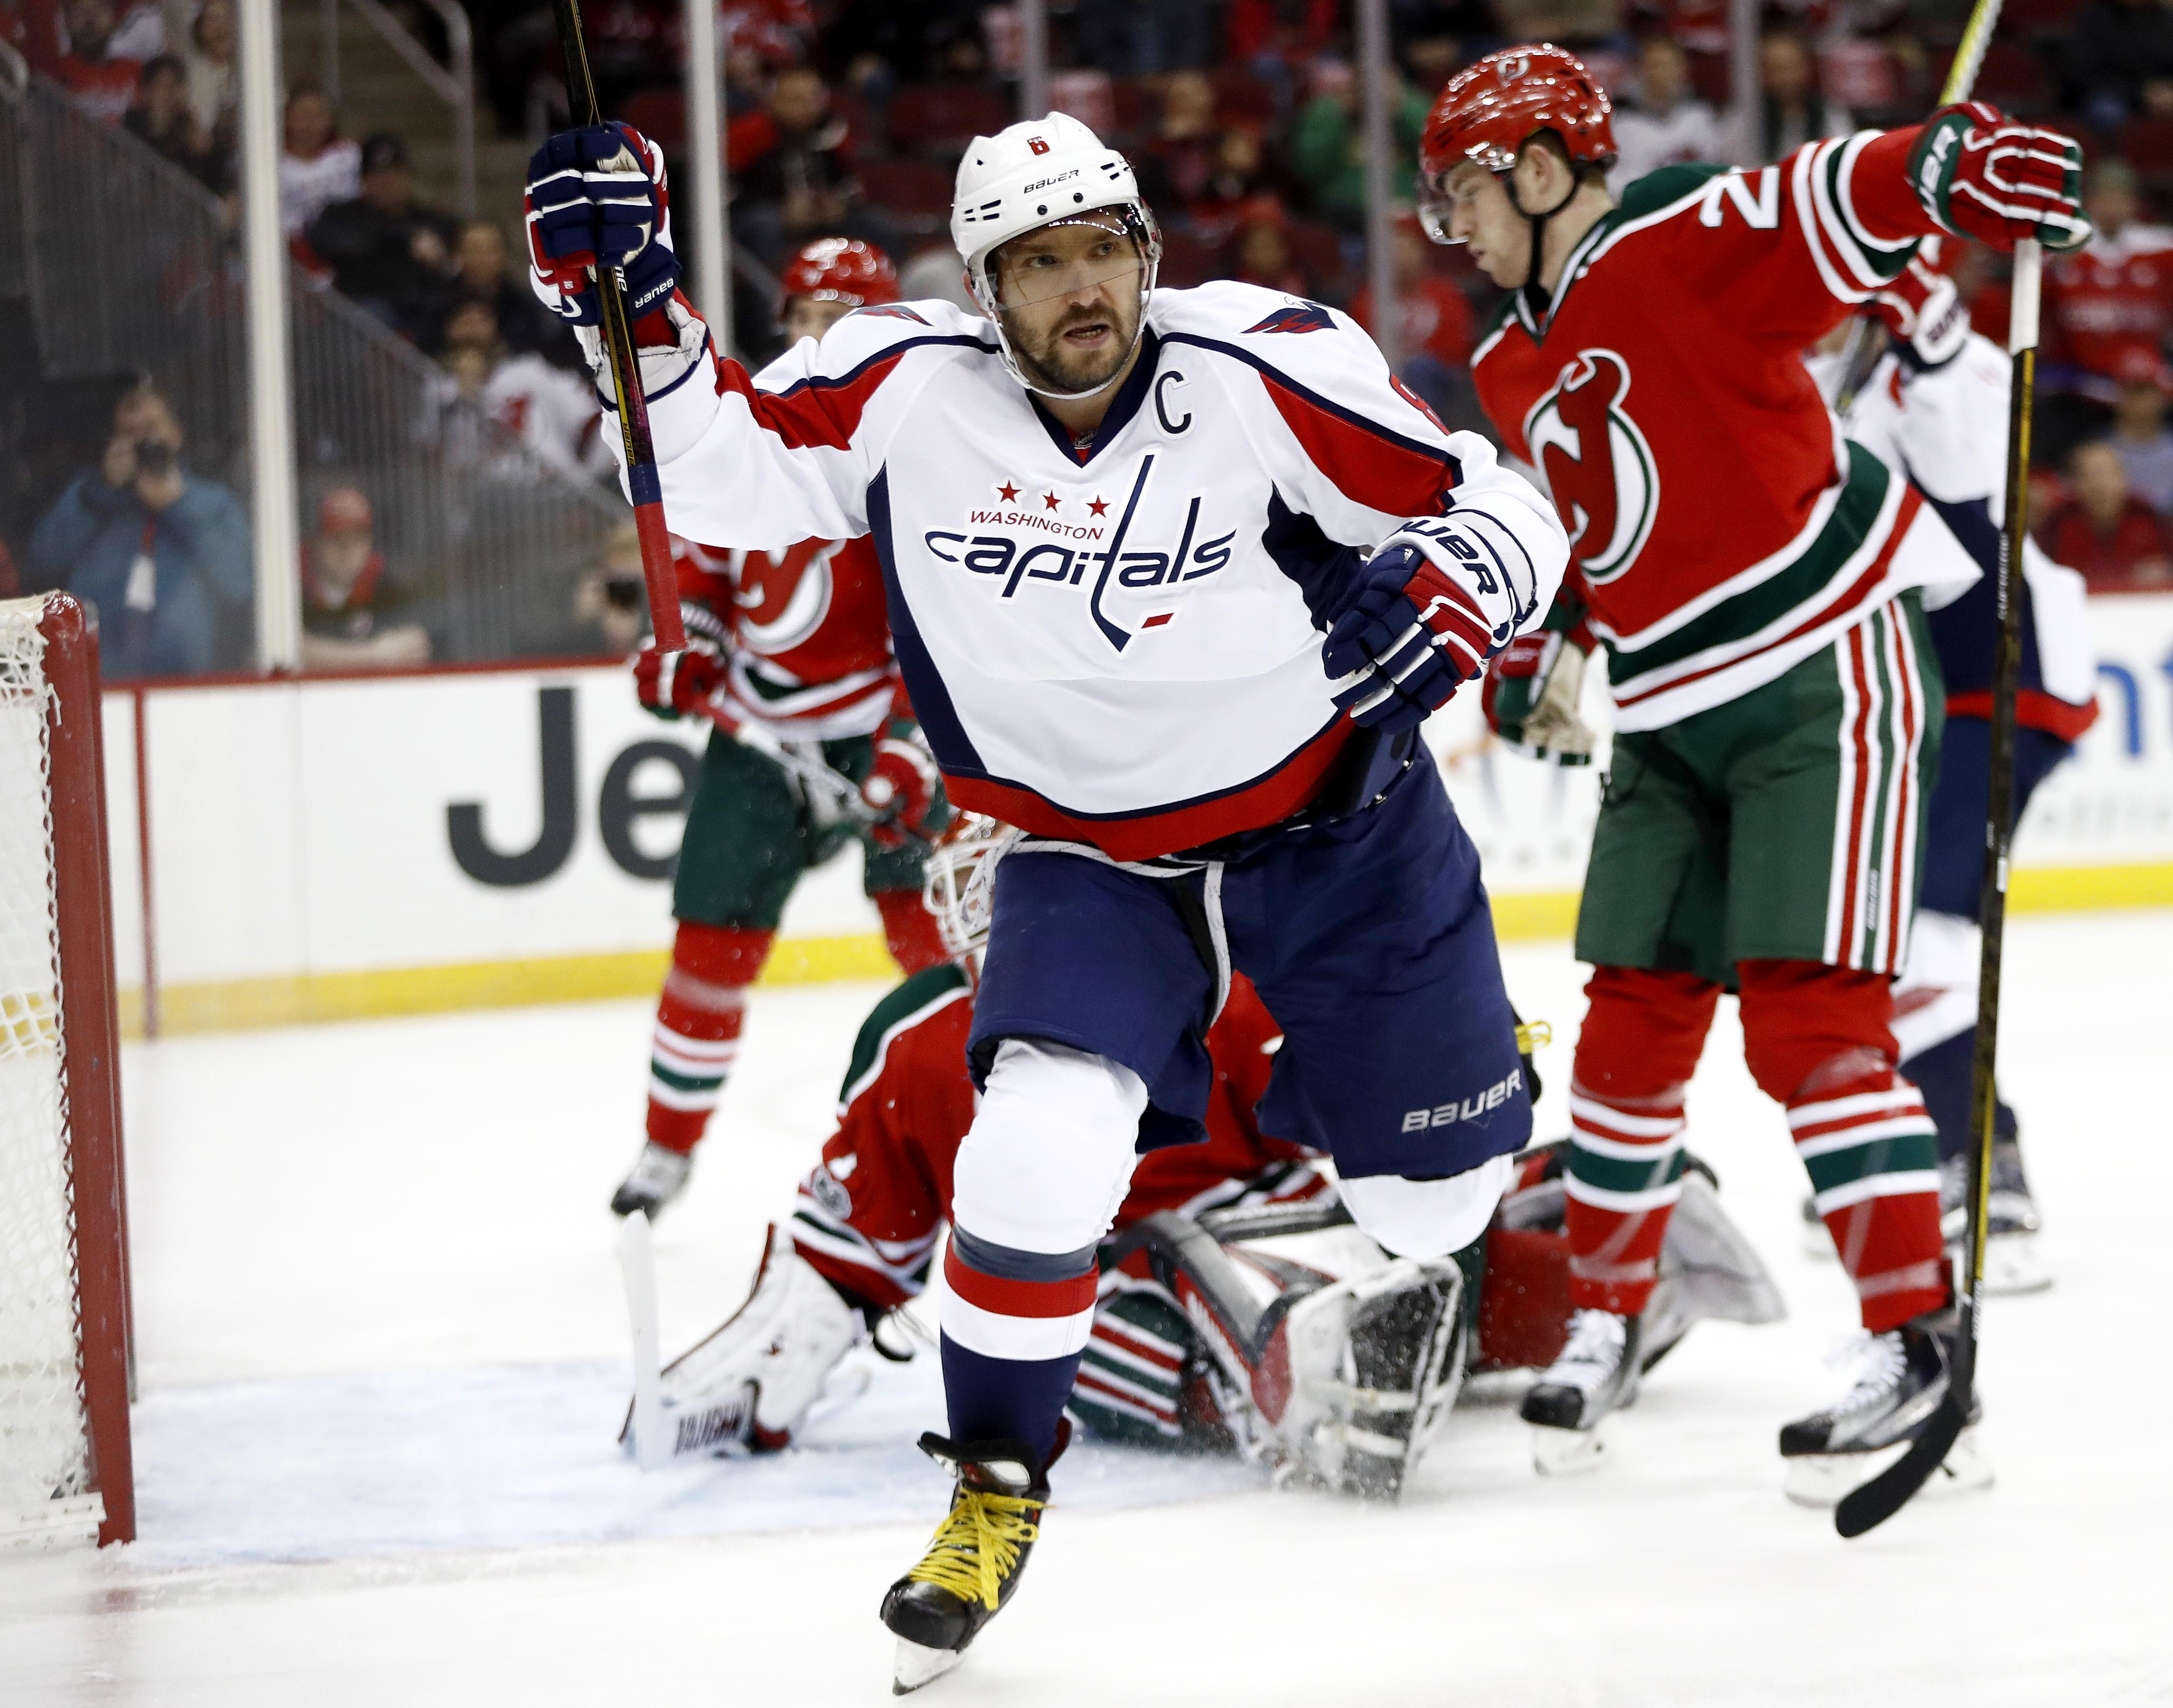 The jersey that Alex Ovechkin scored 'The Goal' in is up for auction